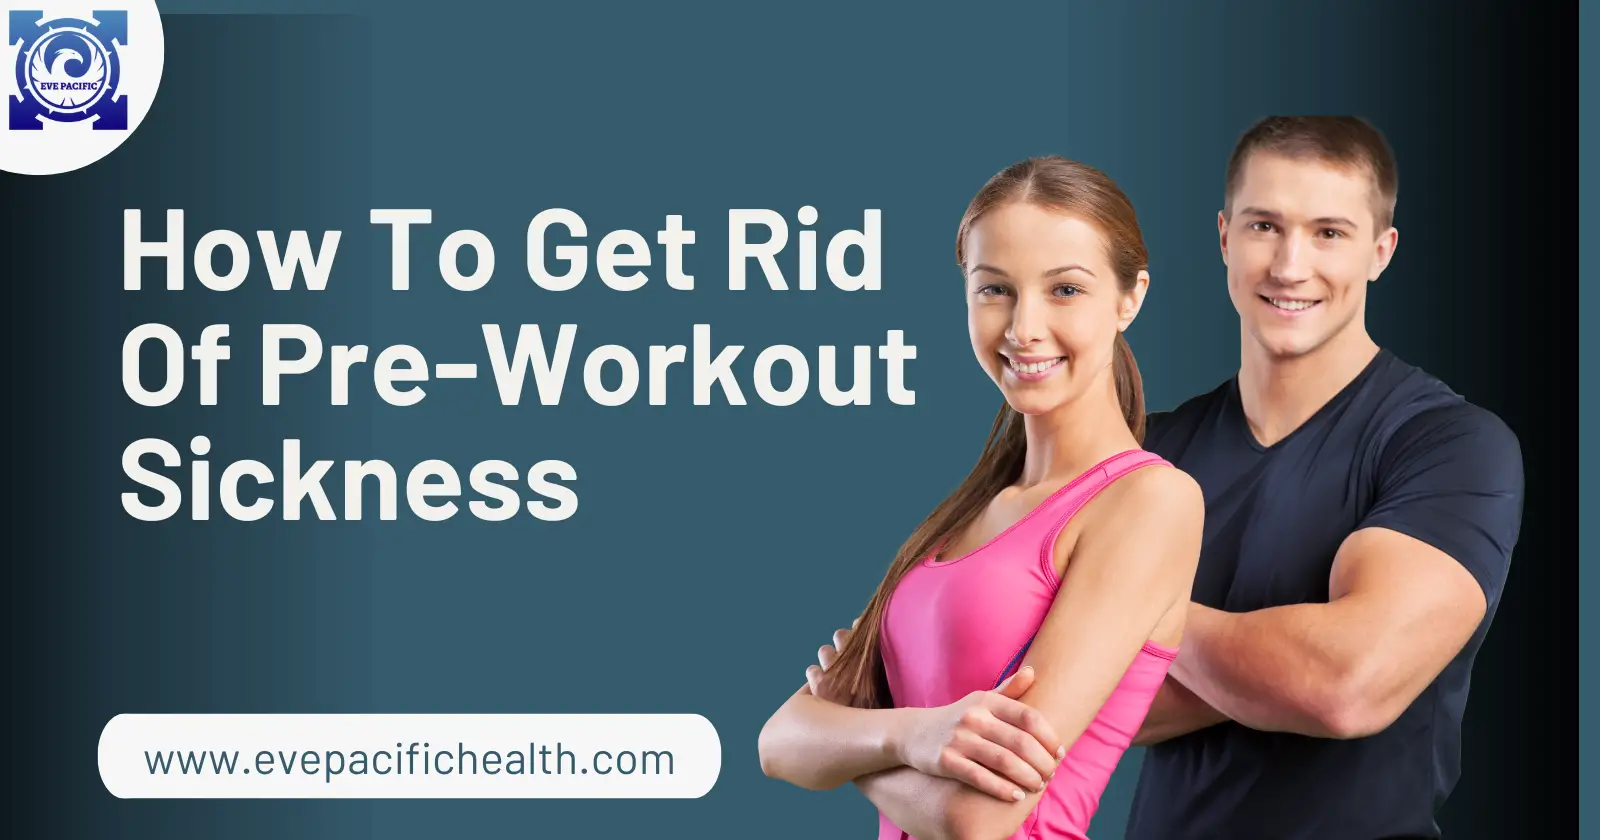 How To Get Rid Of Pre-Workout Sickness